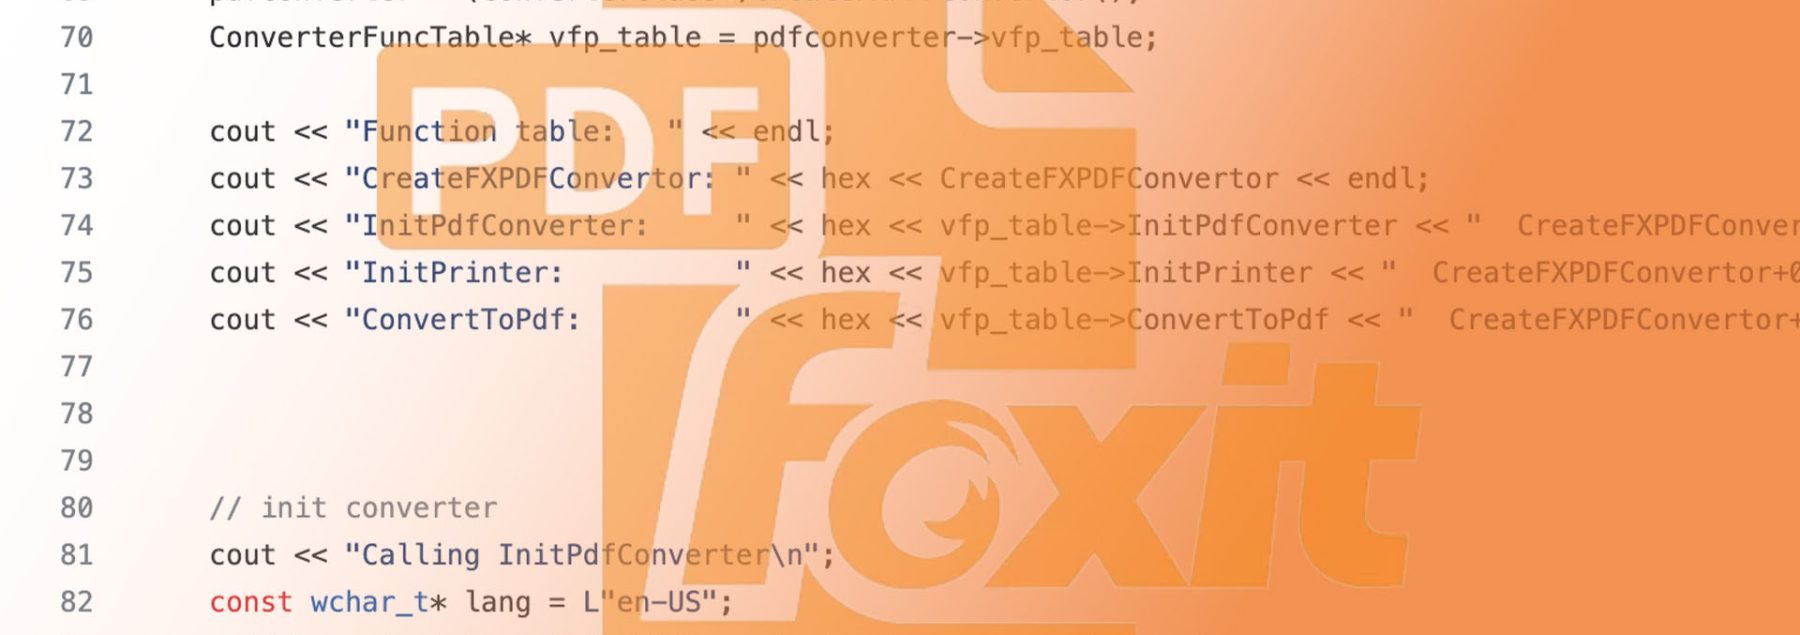 Fuzzing FoxitReader 9.7’s ConvertToPDF | Signal Labs | Advanced Offensive Cybersecurity Training | Self-Paced Trainings | Live Trainings | Virtual Trainings | Custom Private Trainings for Business